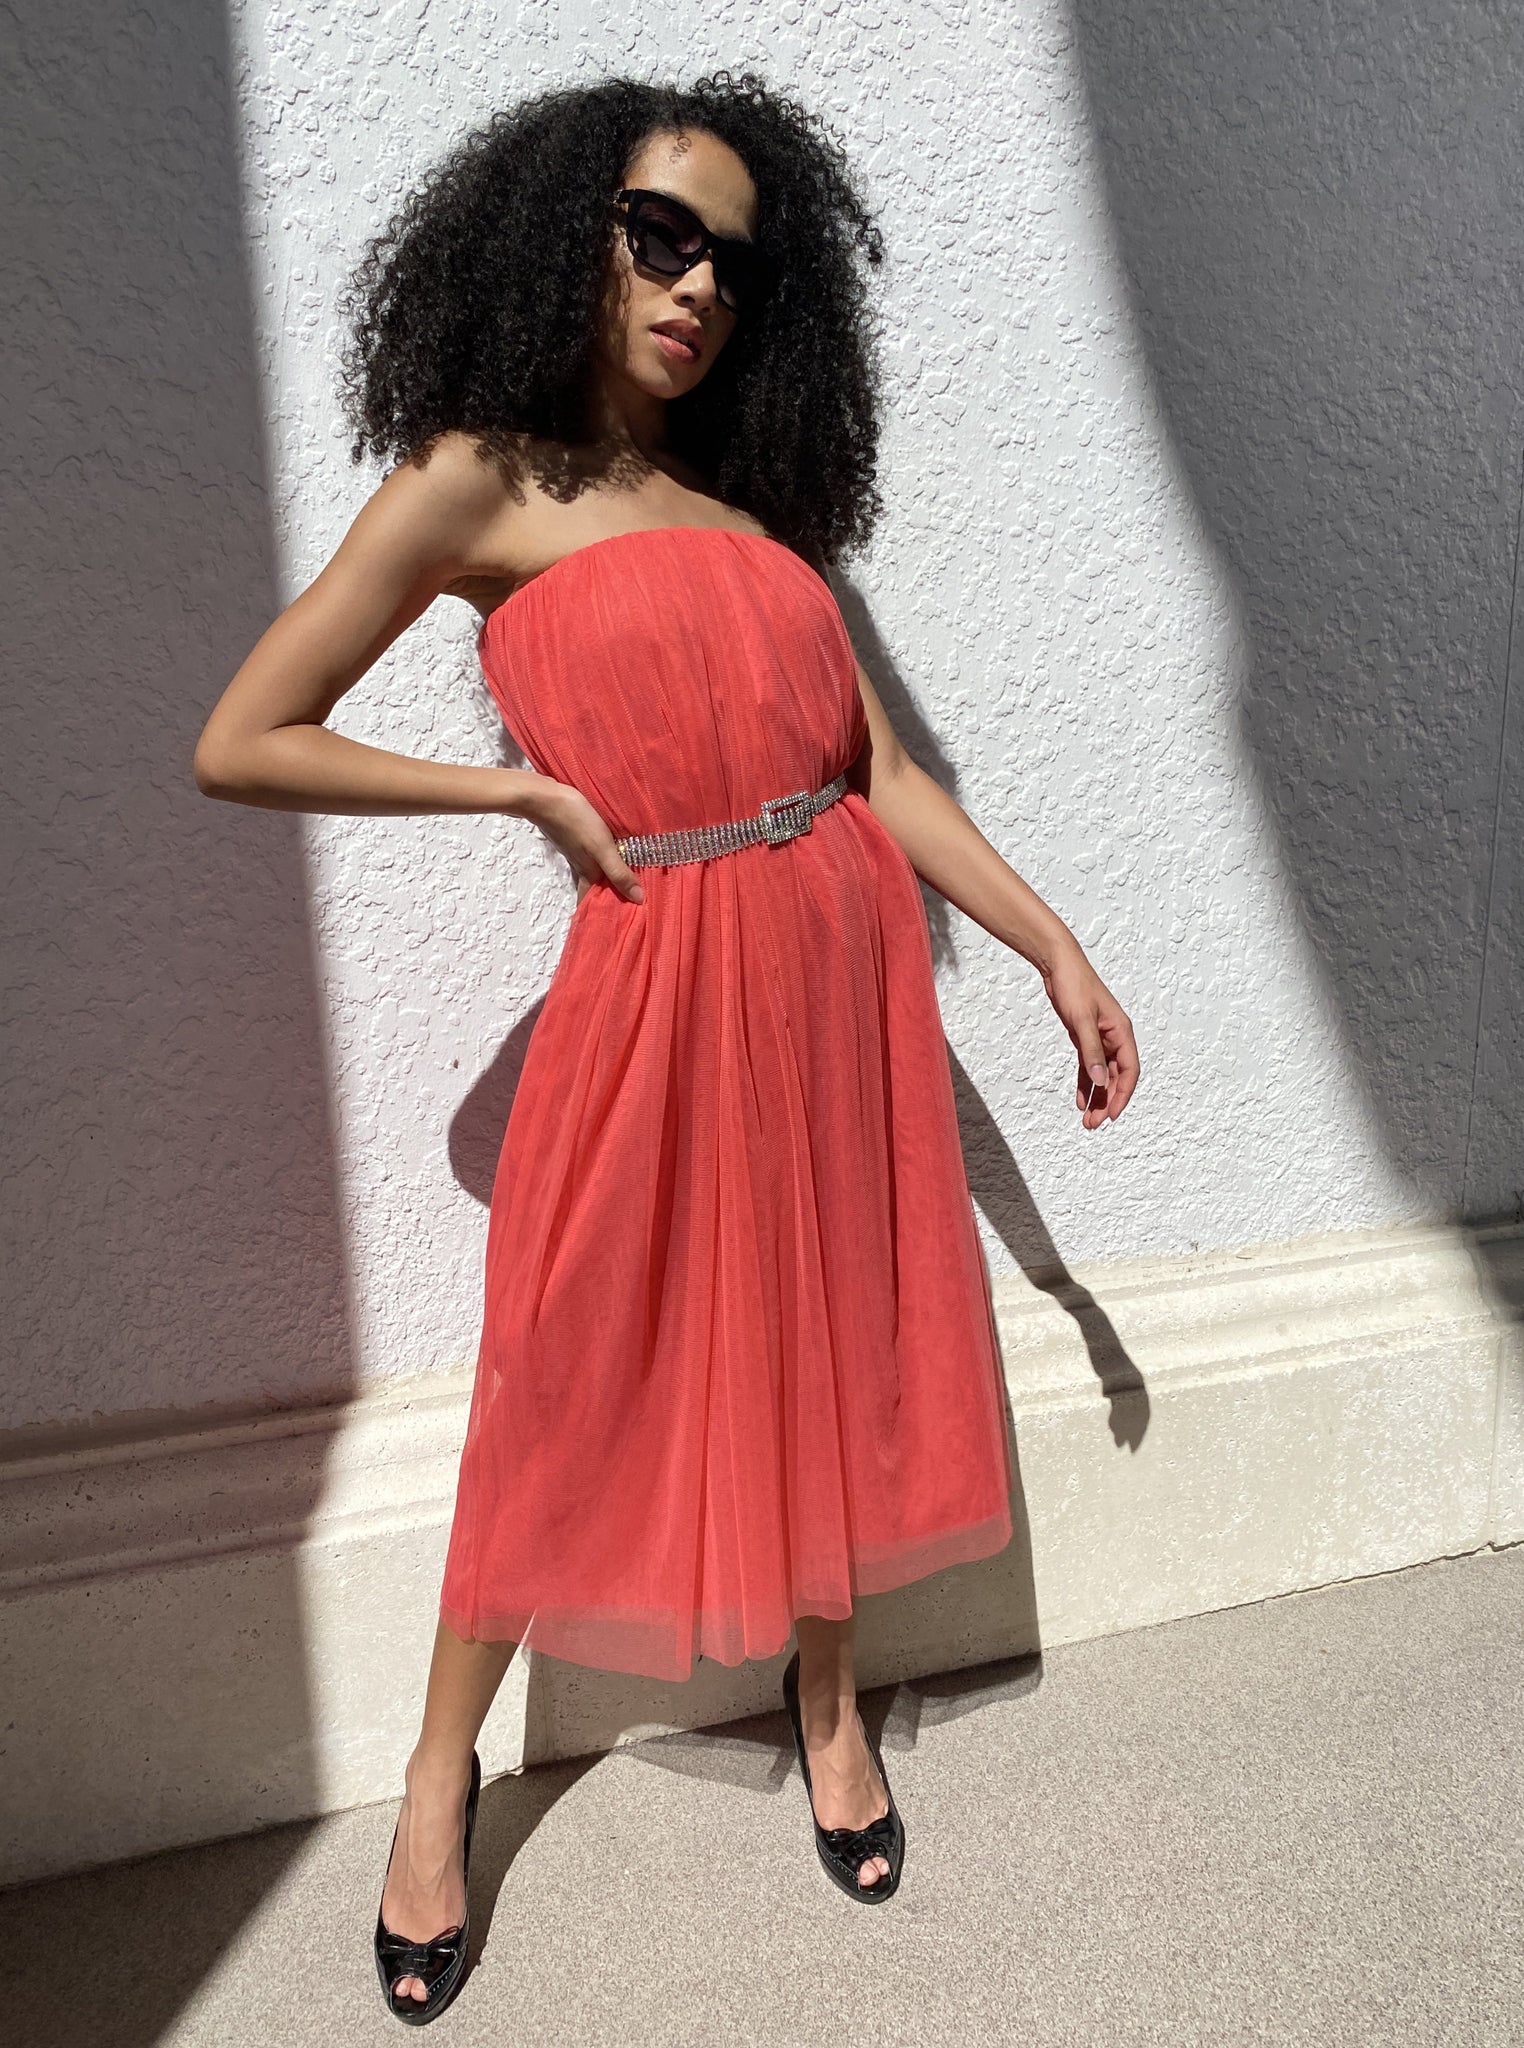 Model wearing a Long Coral Red tulle skirt as a dress